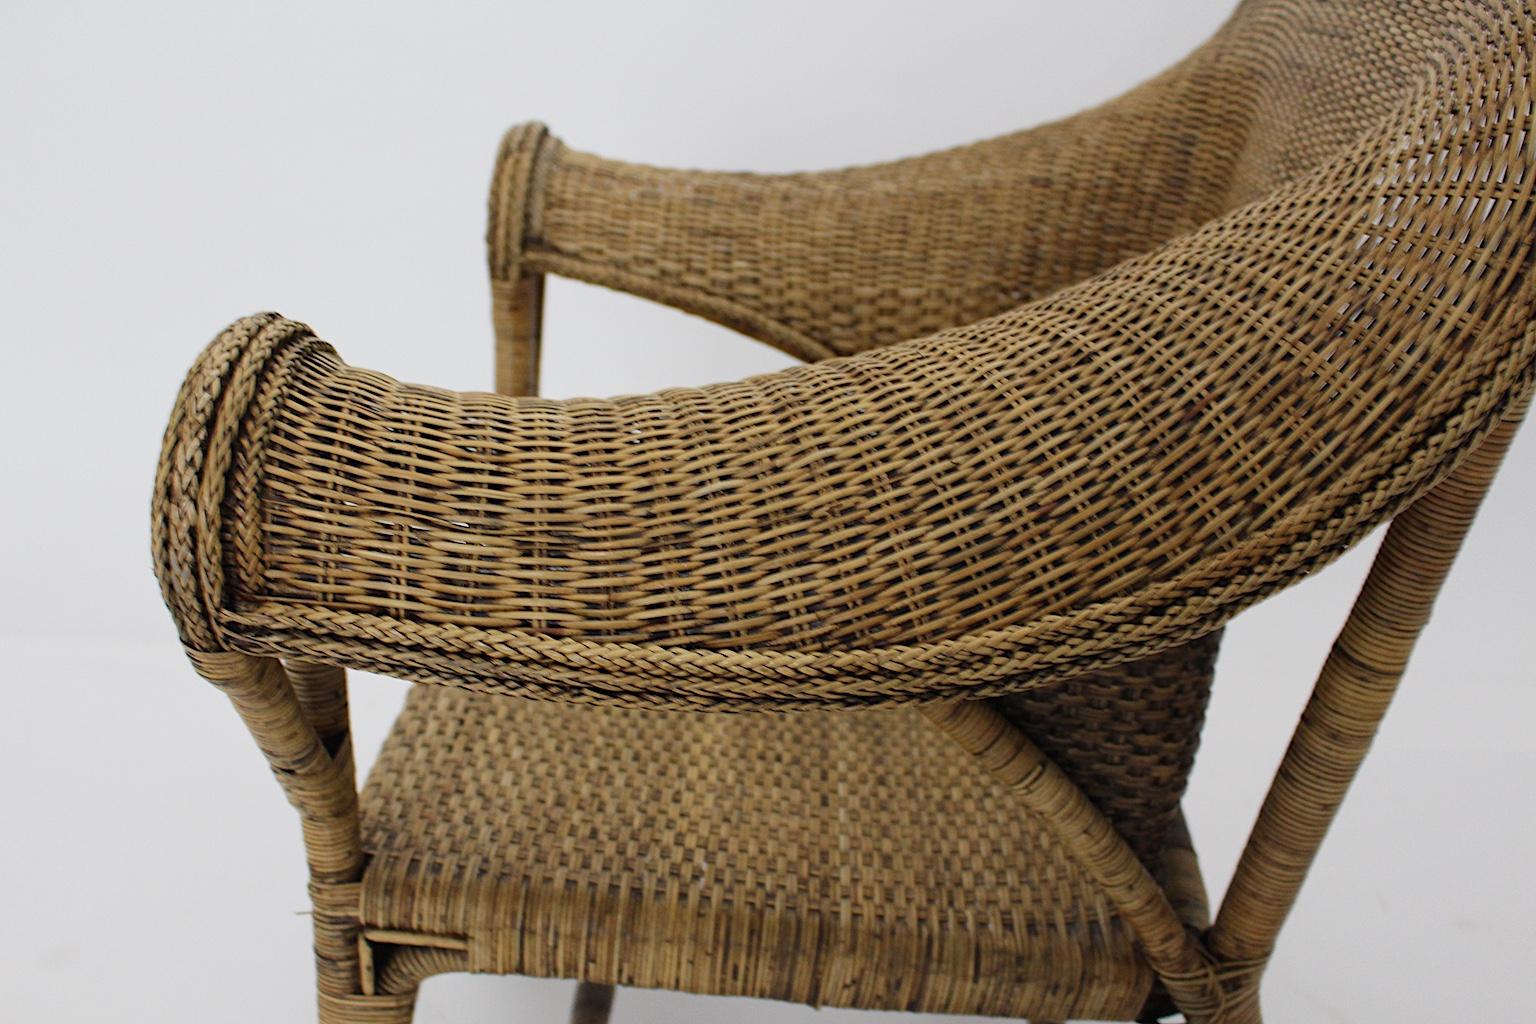 Organic Arts & Crafts Vintage Wicker Rattan Armchair Dryad and Co circa 1910 UK For Sale 6